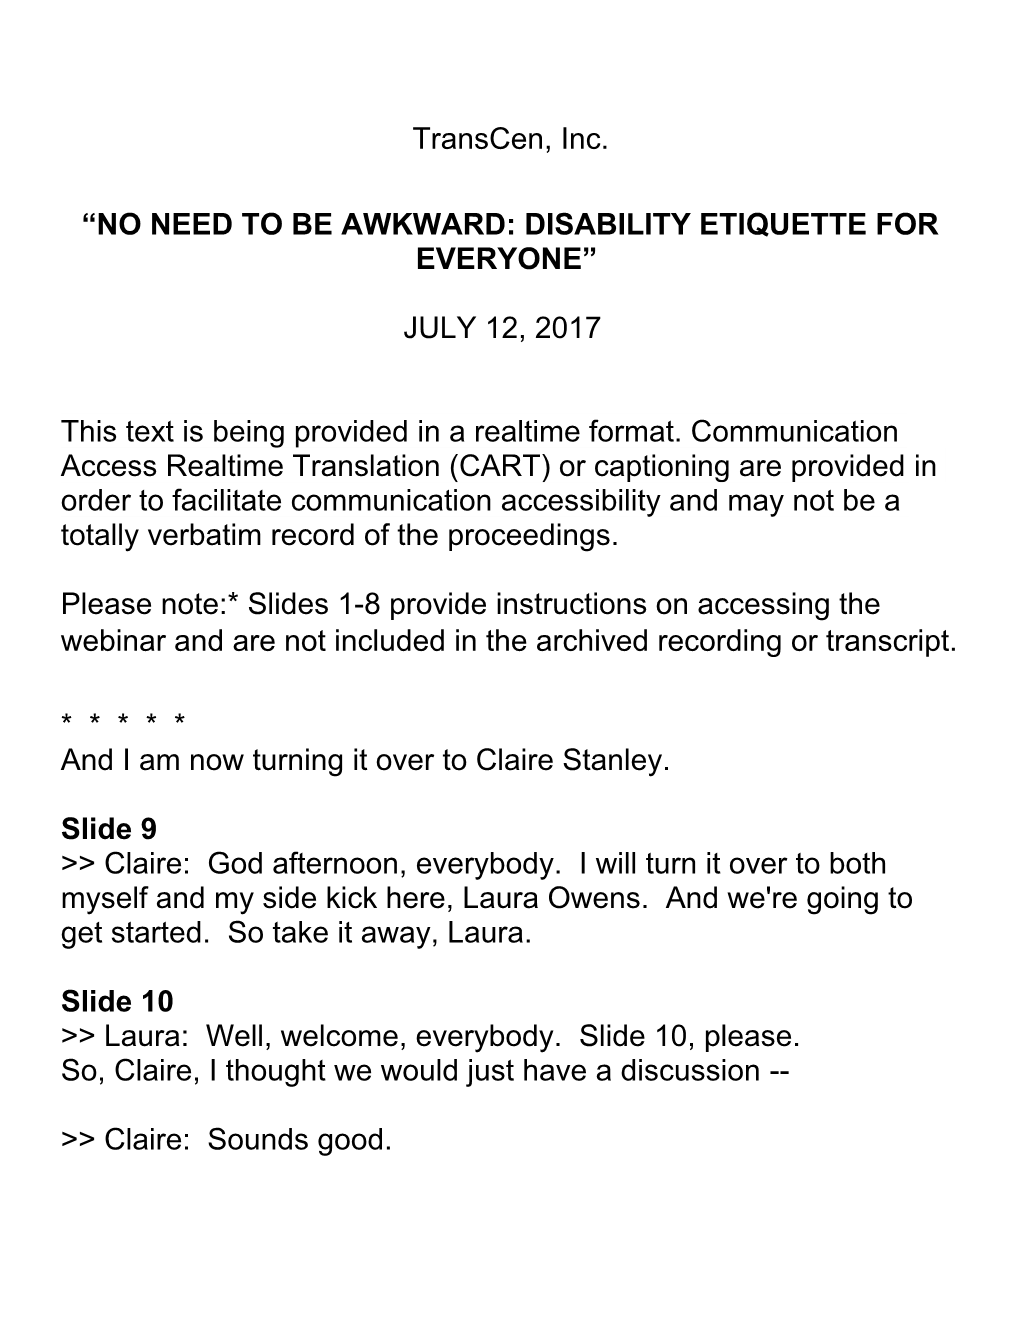 No Need to Be Awkward: Disability Etiquette for Everyone